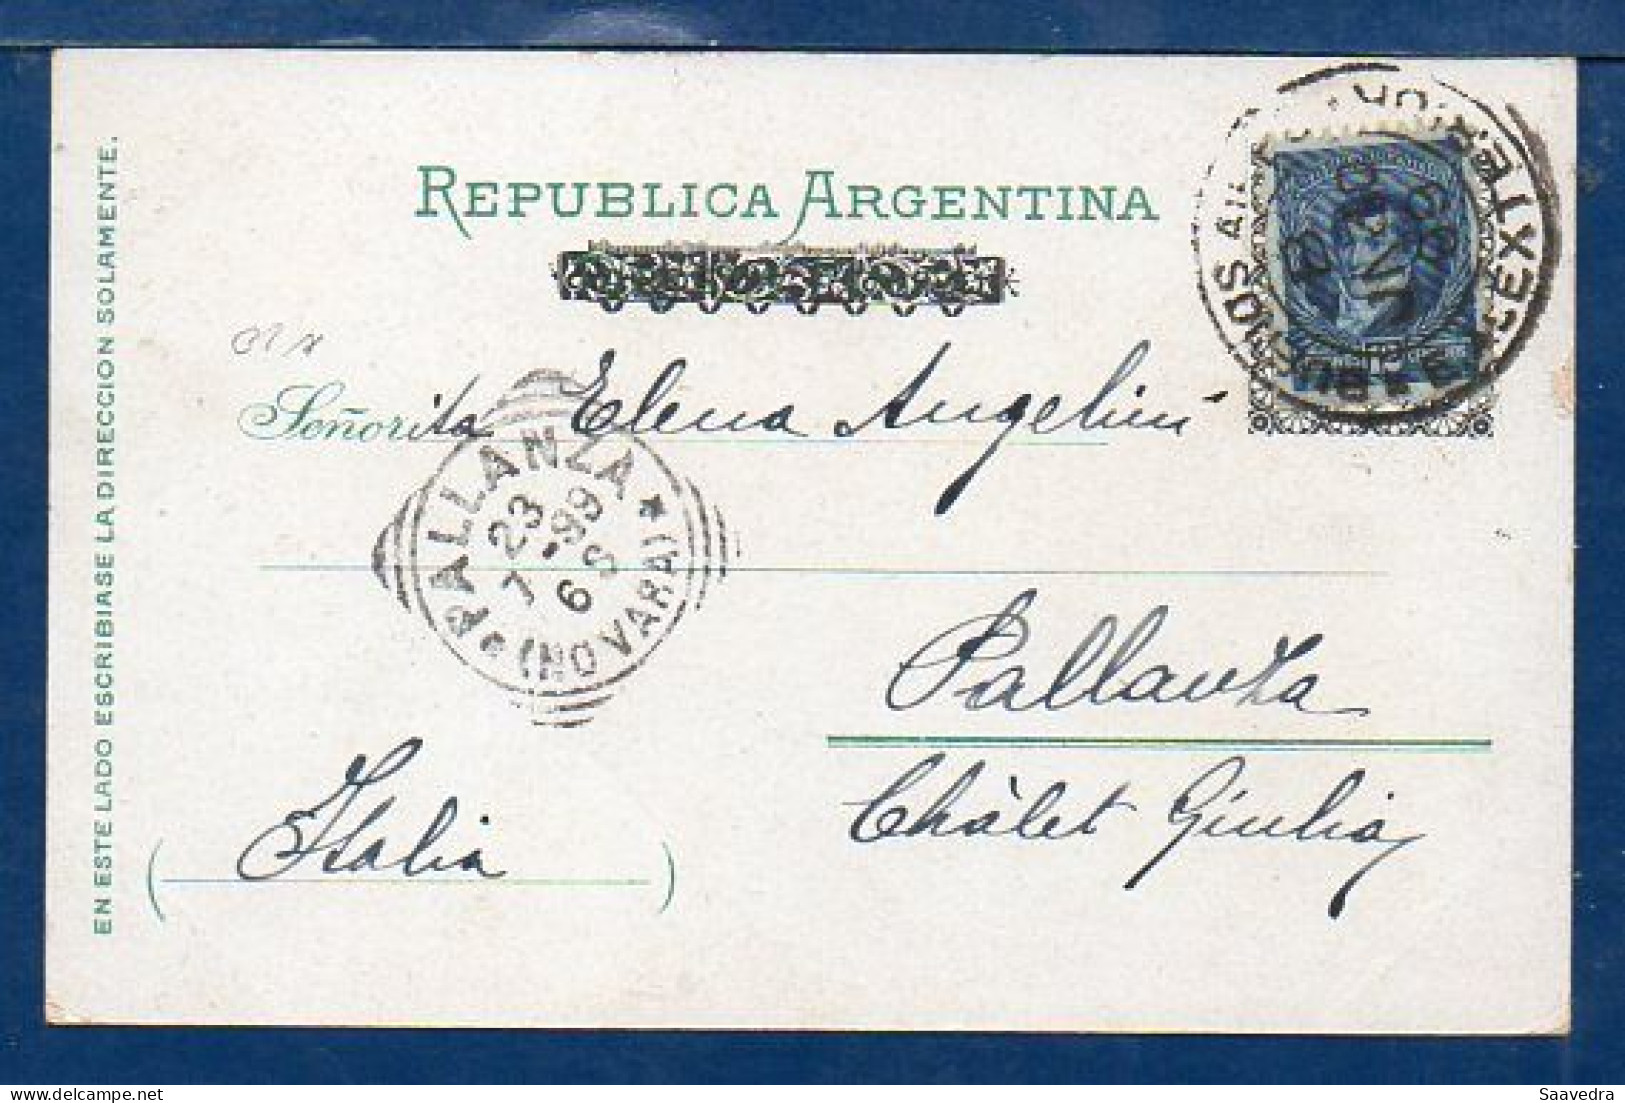 Argentina To Italy, "Gruss From Buenos Aires", 1899, Used Litho Postcard  (037) - Argentine